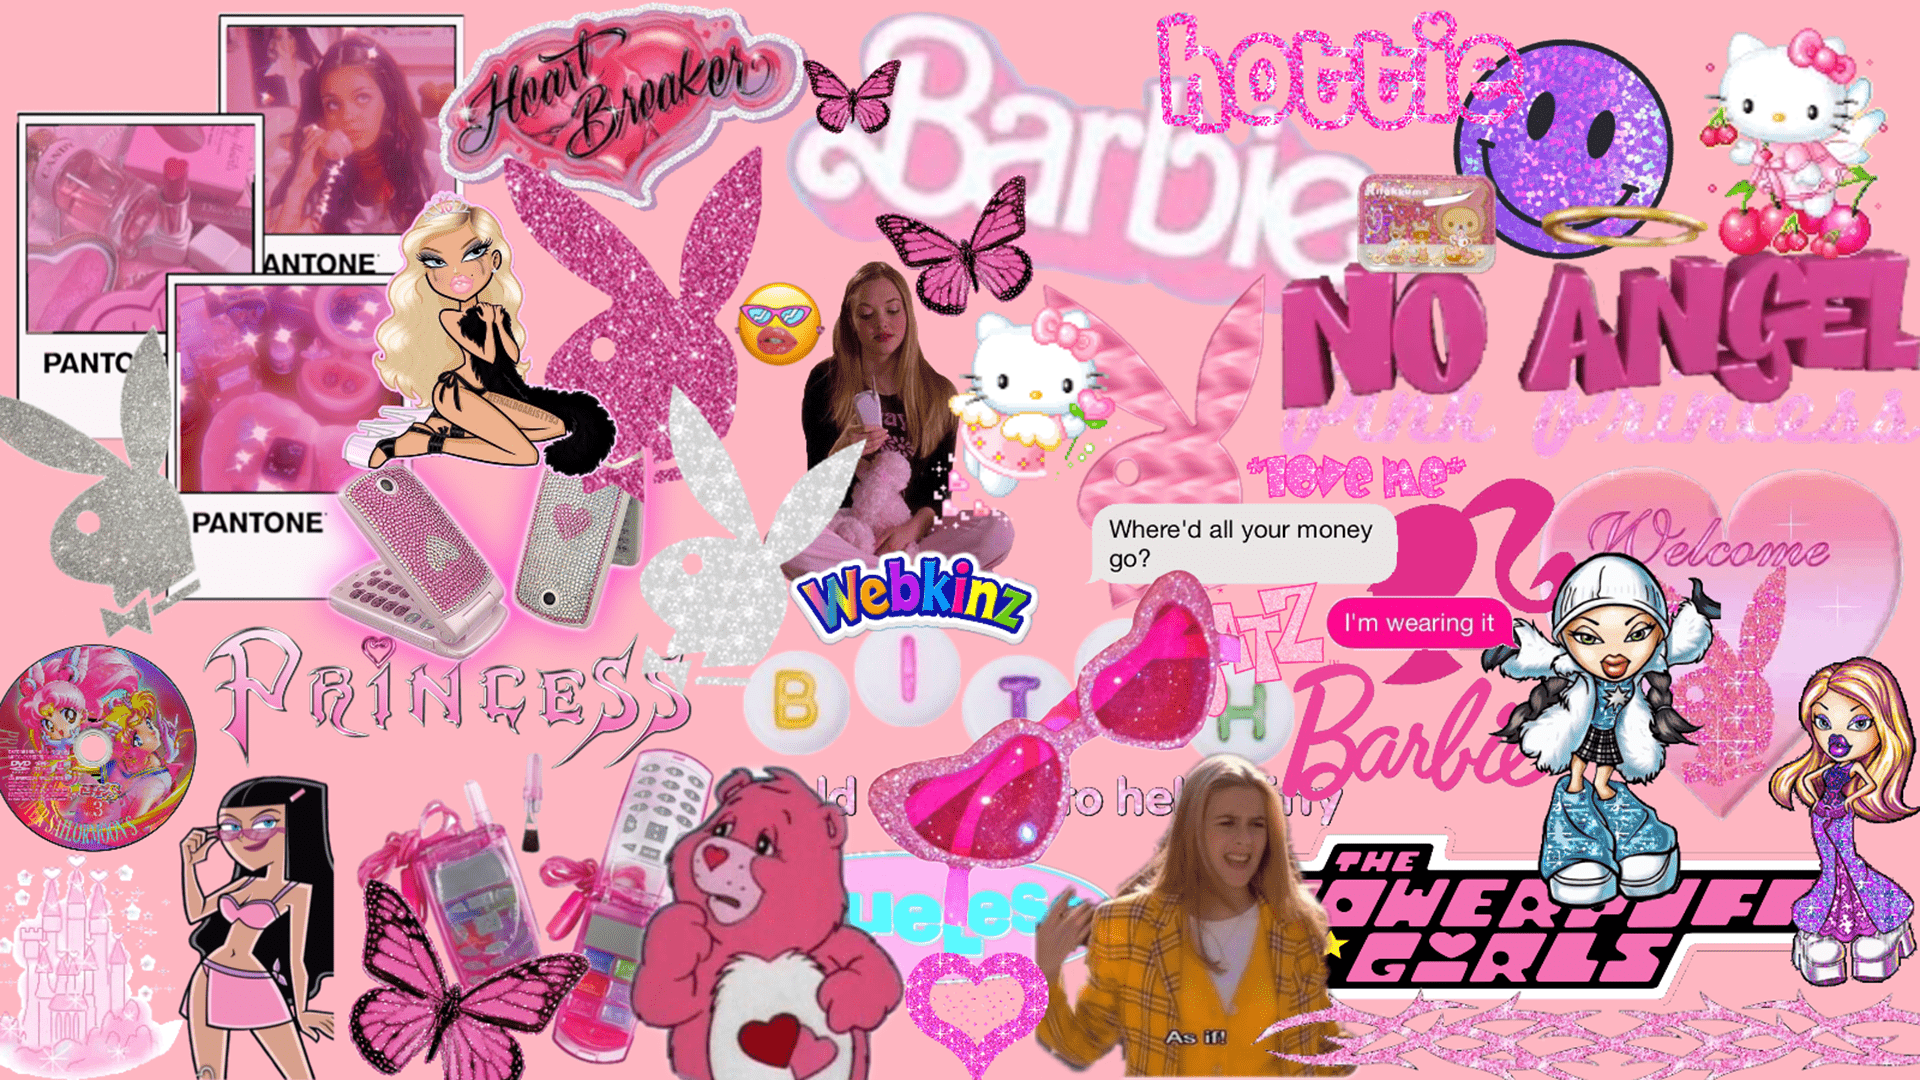 A collage of pink and purple images including barbie, care bears, and a t-shirt that says 